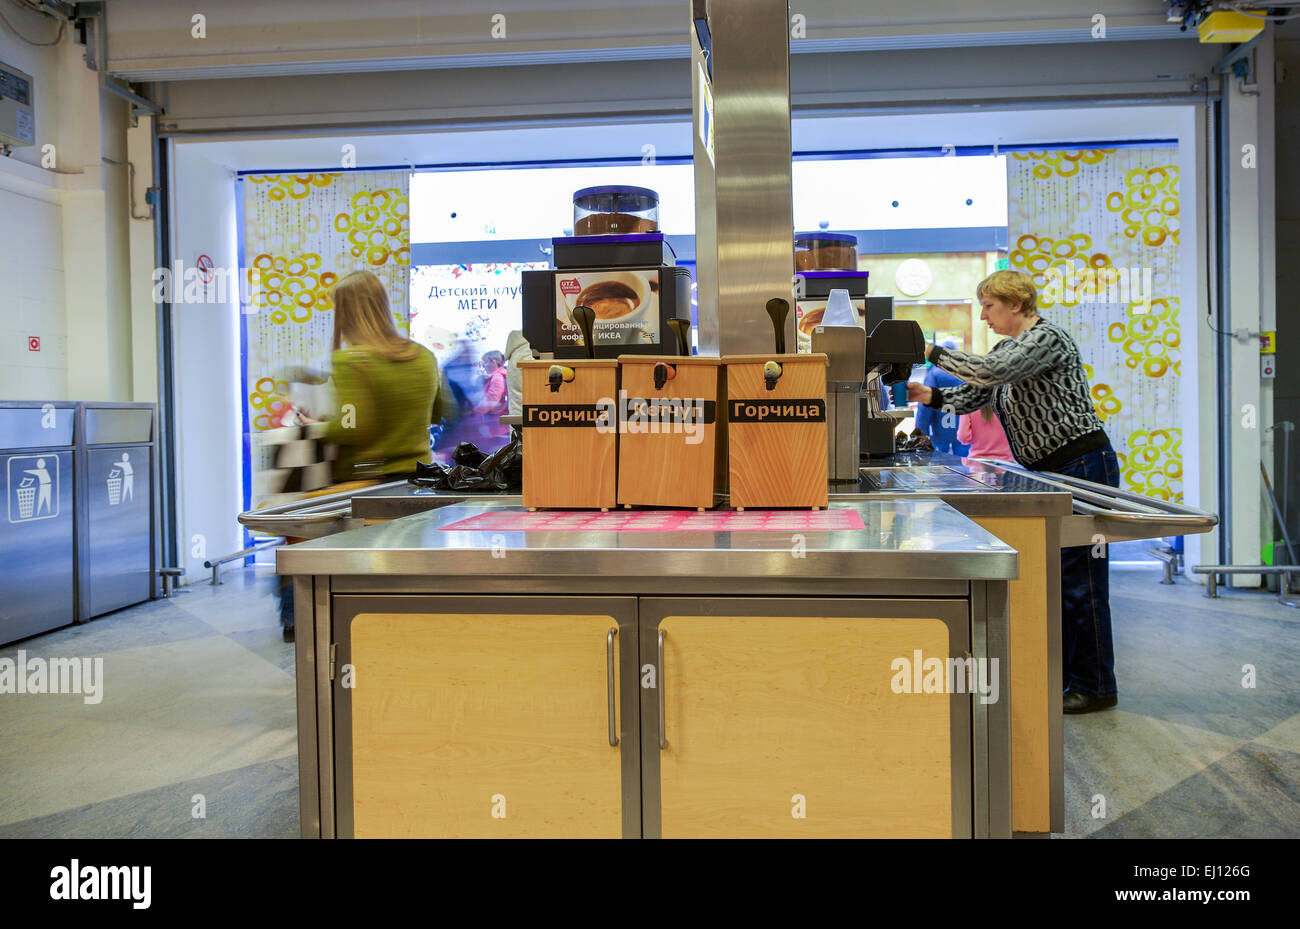 Ikea Interior High Resolution Stock Photography and Images - Alamy